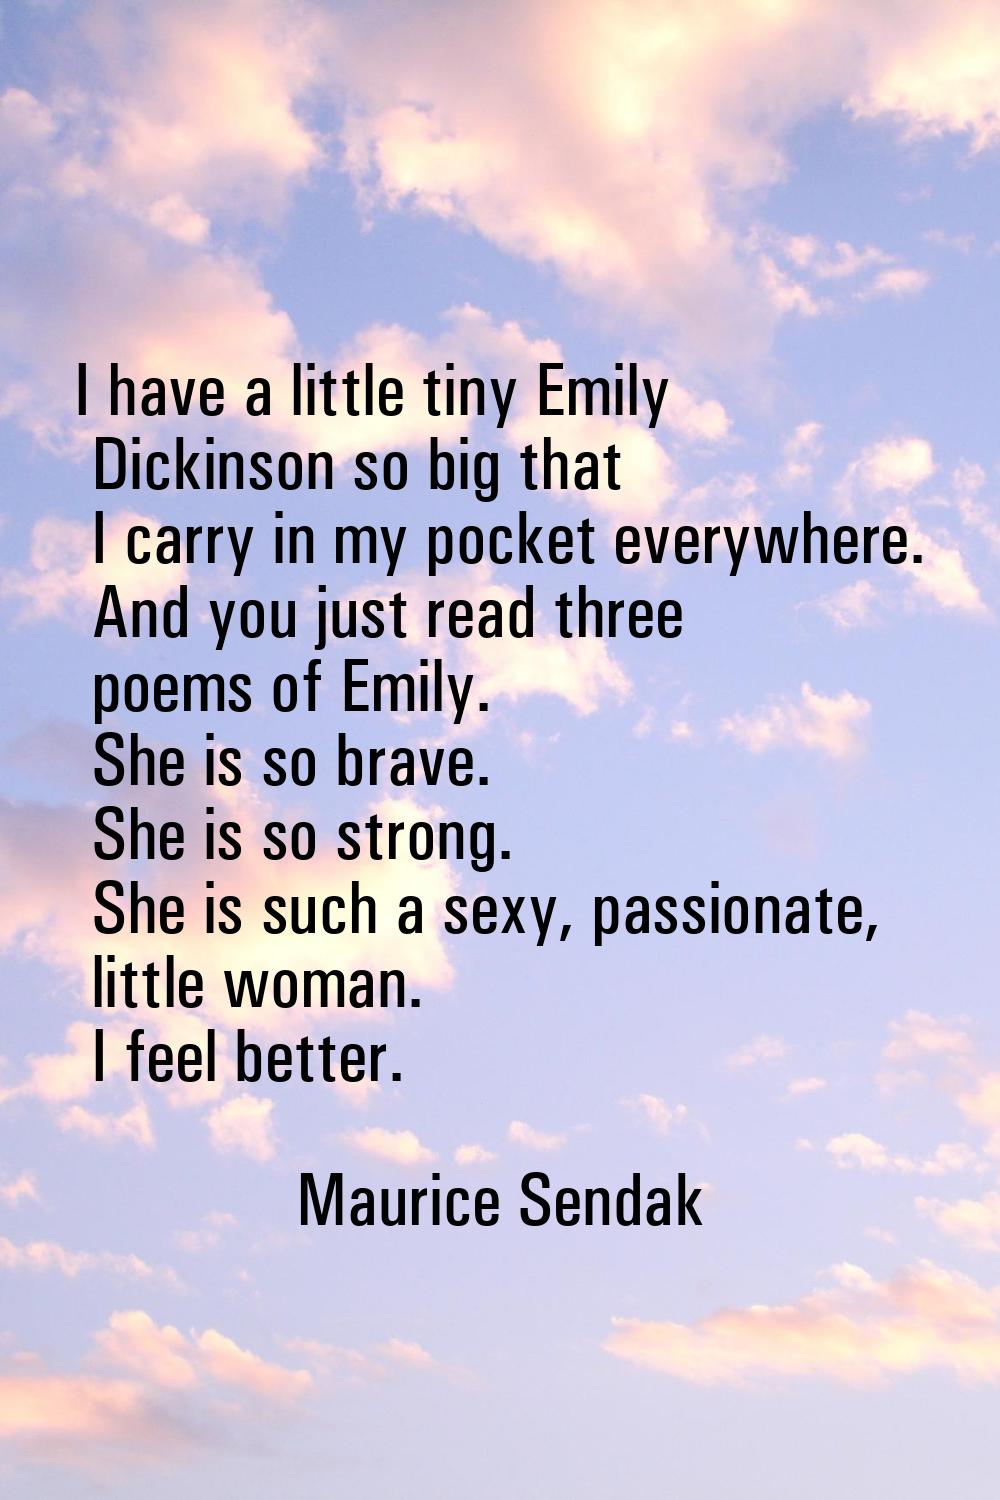 I have a little tiny Emily Dickinson so big that I carry in my pocket everywhere. And you just read